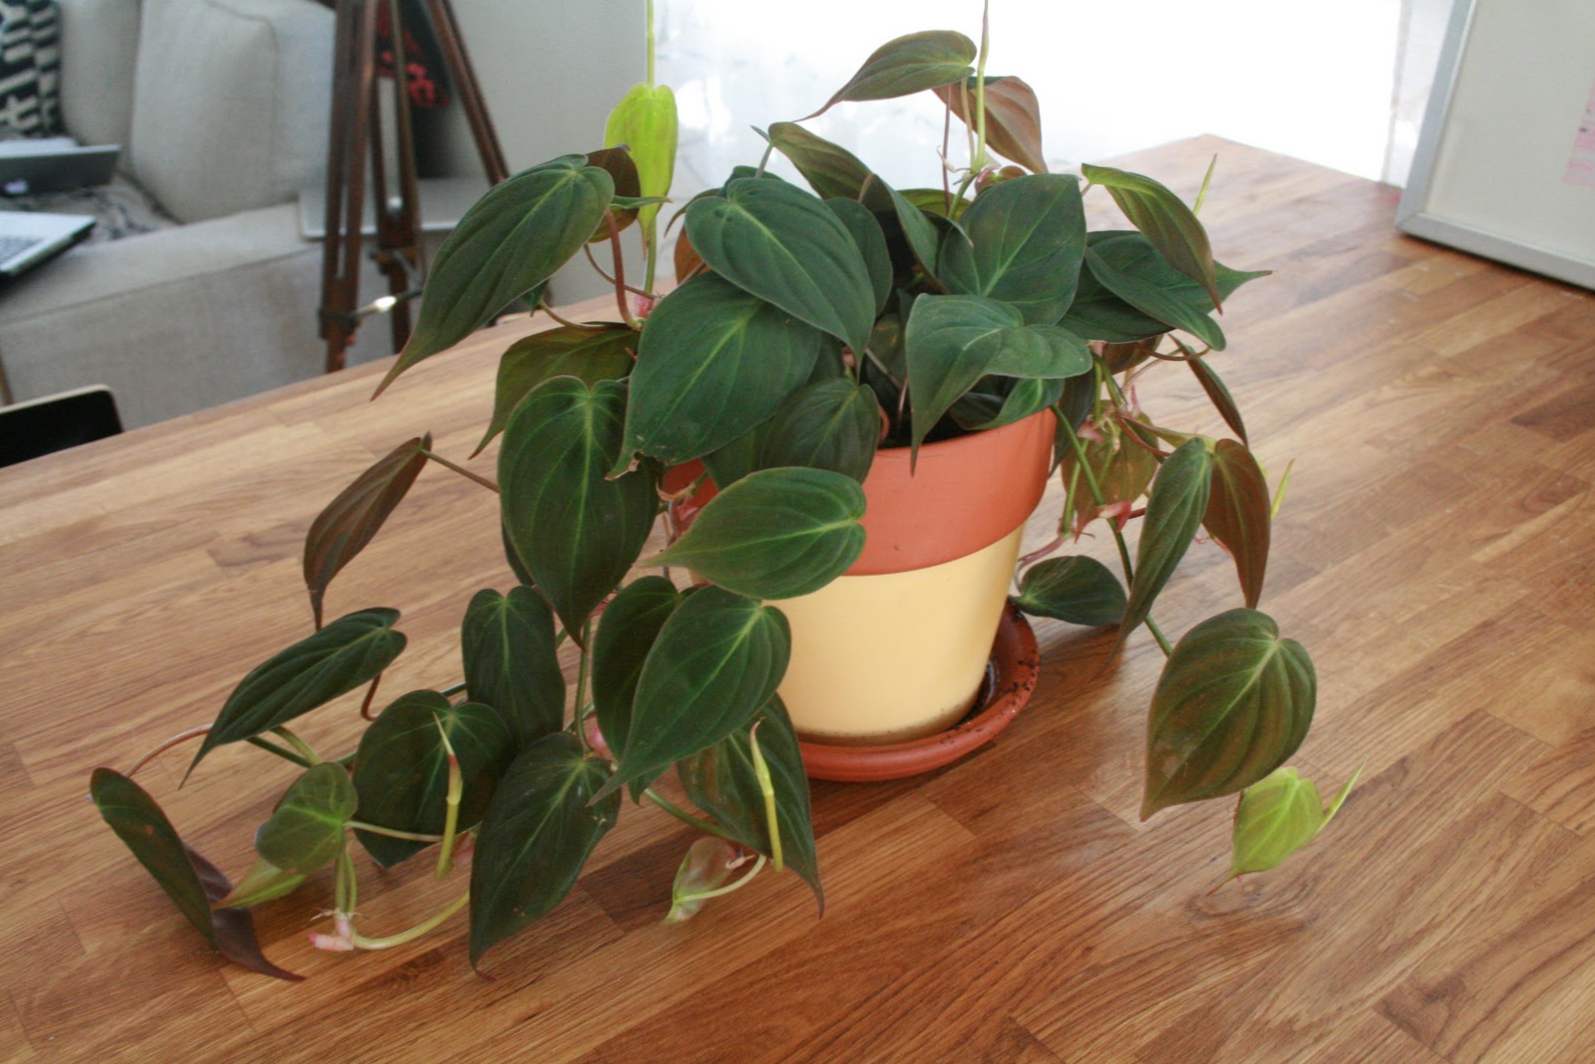 Typy Philodendron (Philodendron), opis, opieka w domu